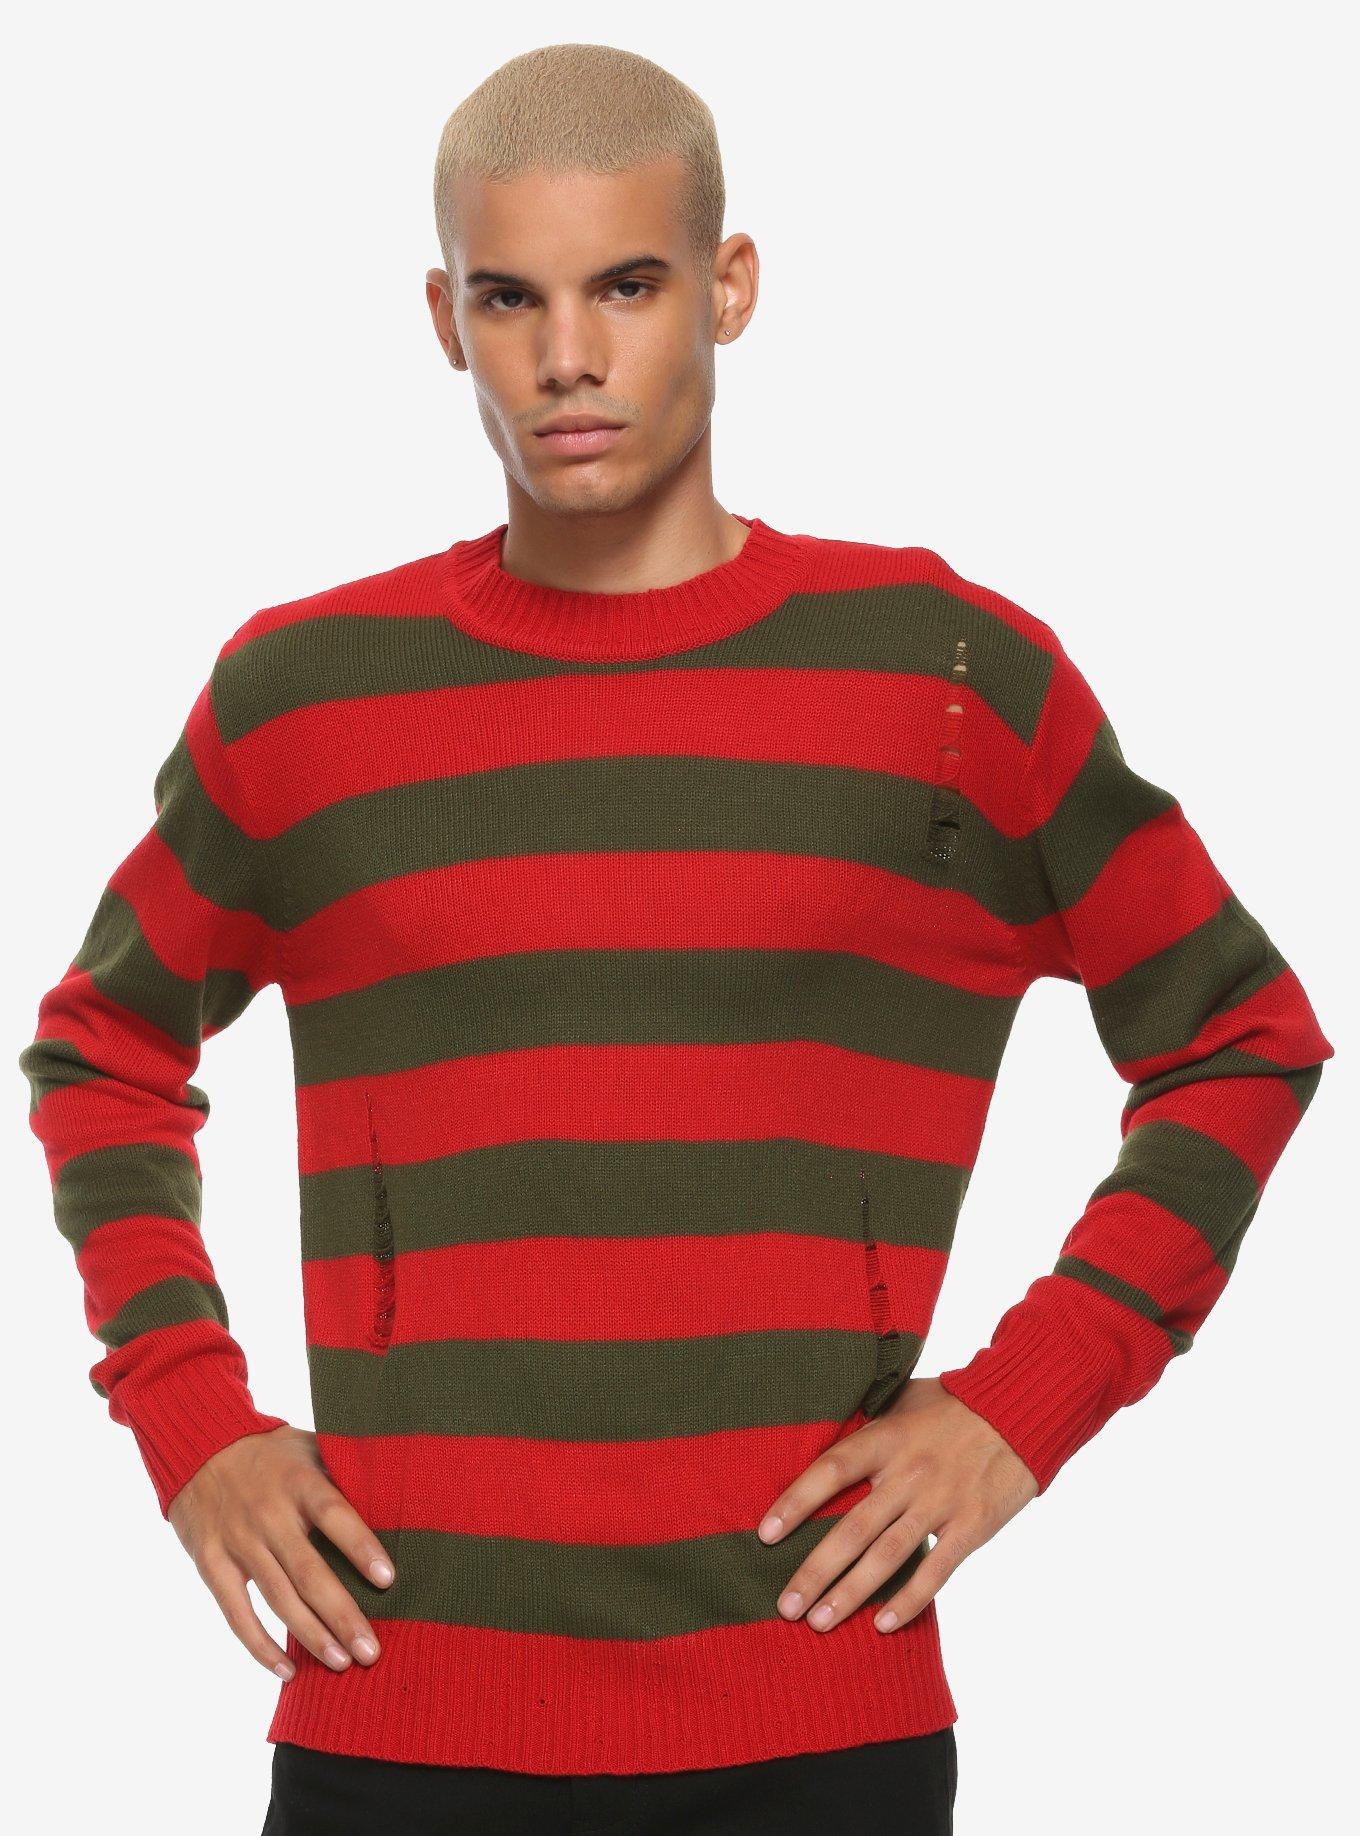 Freddy Krueger Sweater And Hat